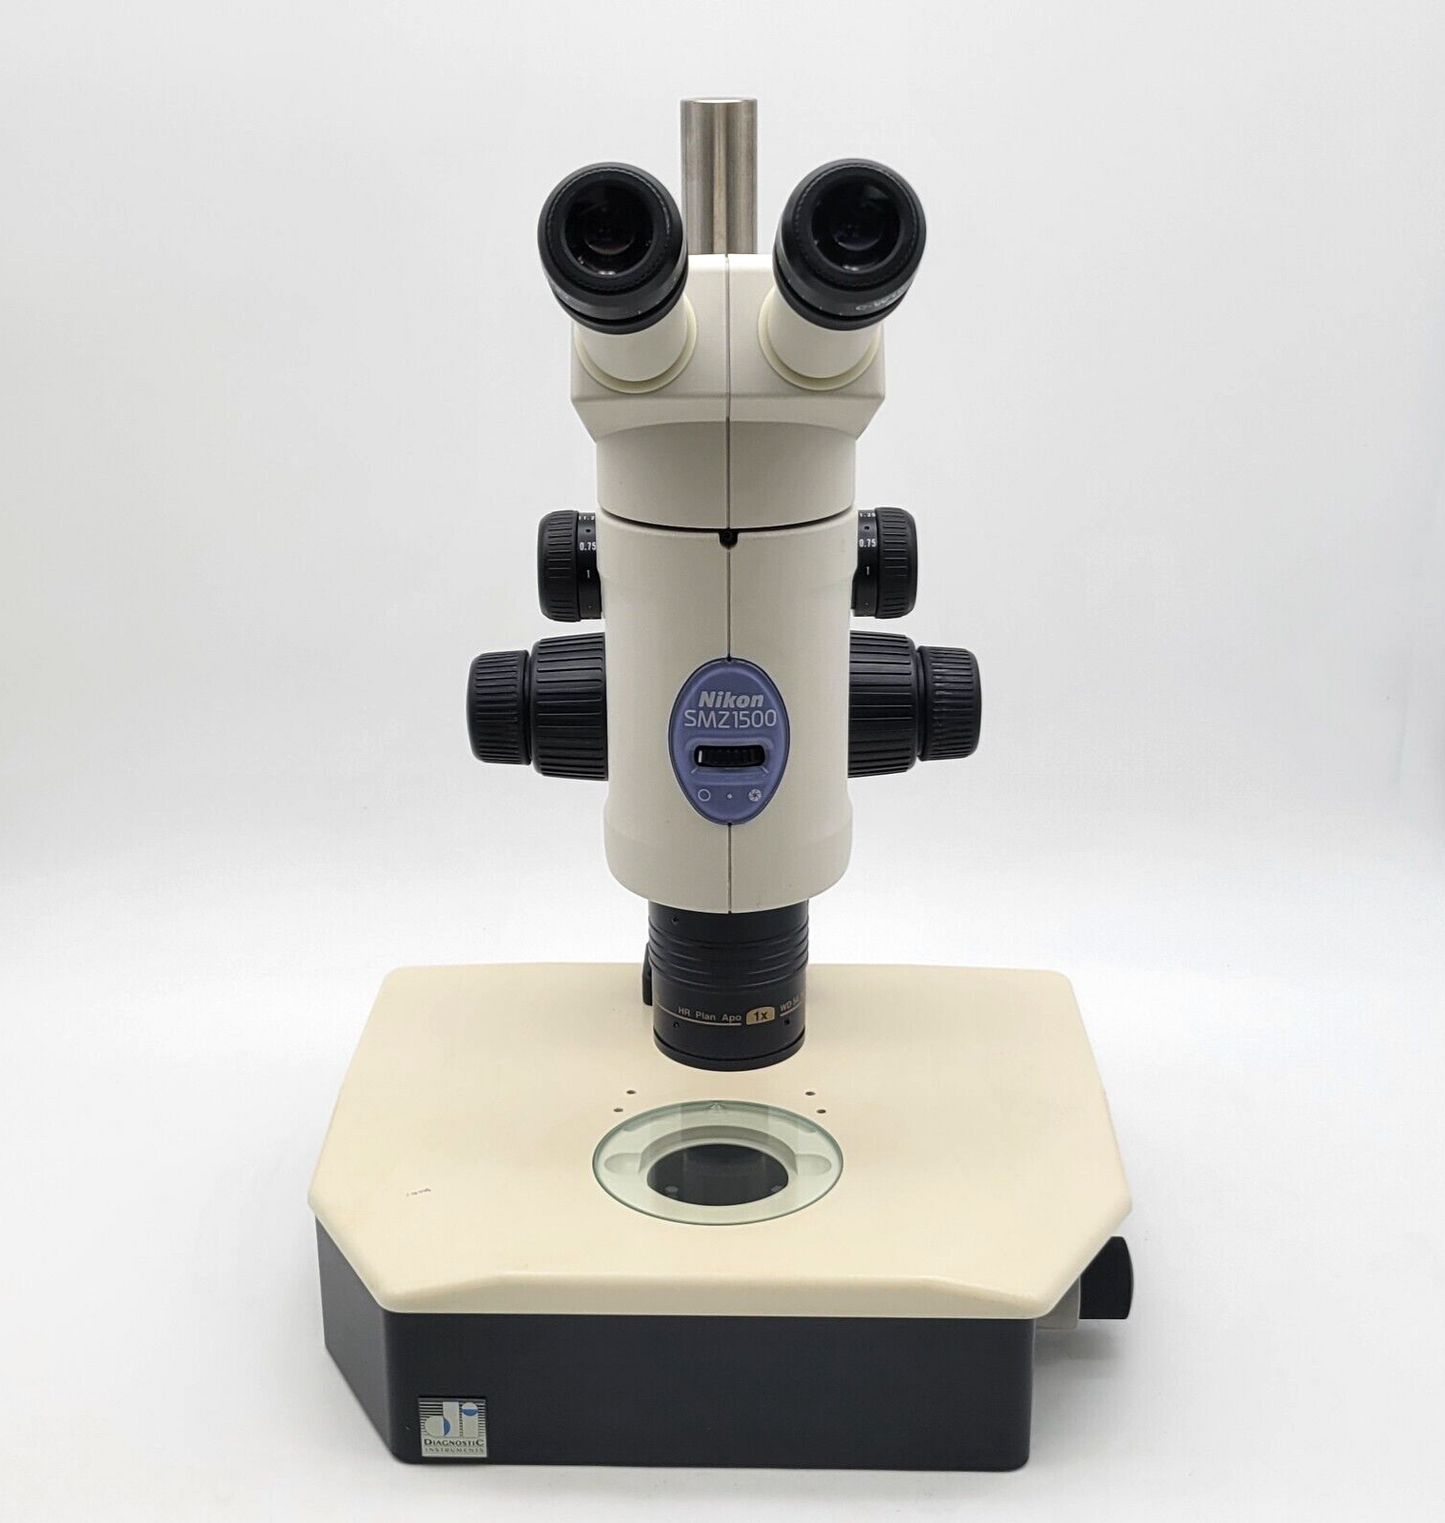 Nikon Stereo Microscope SMZ1500 with Transmitted Light Stand - microscopemarketplace